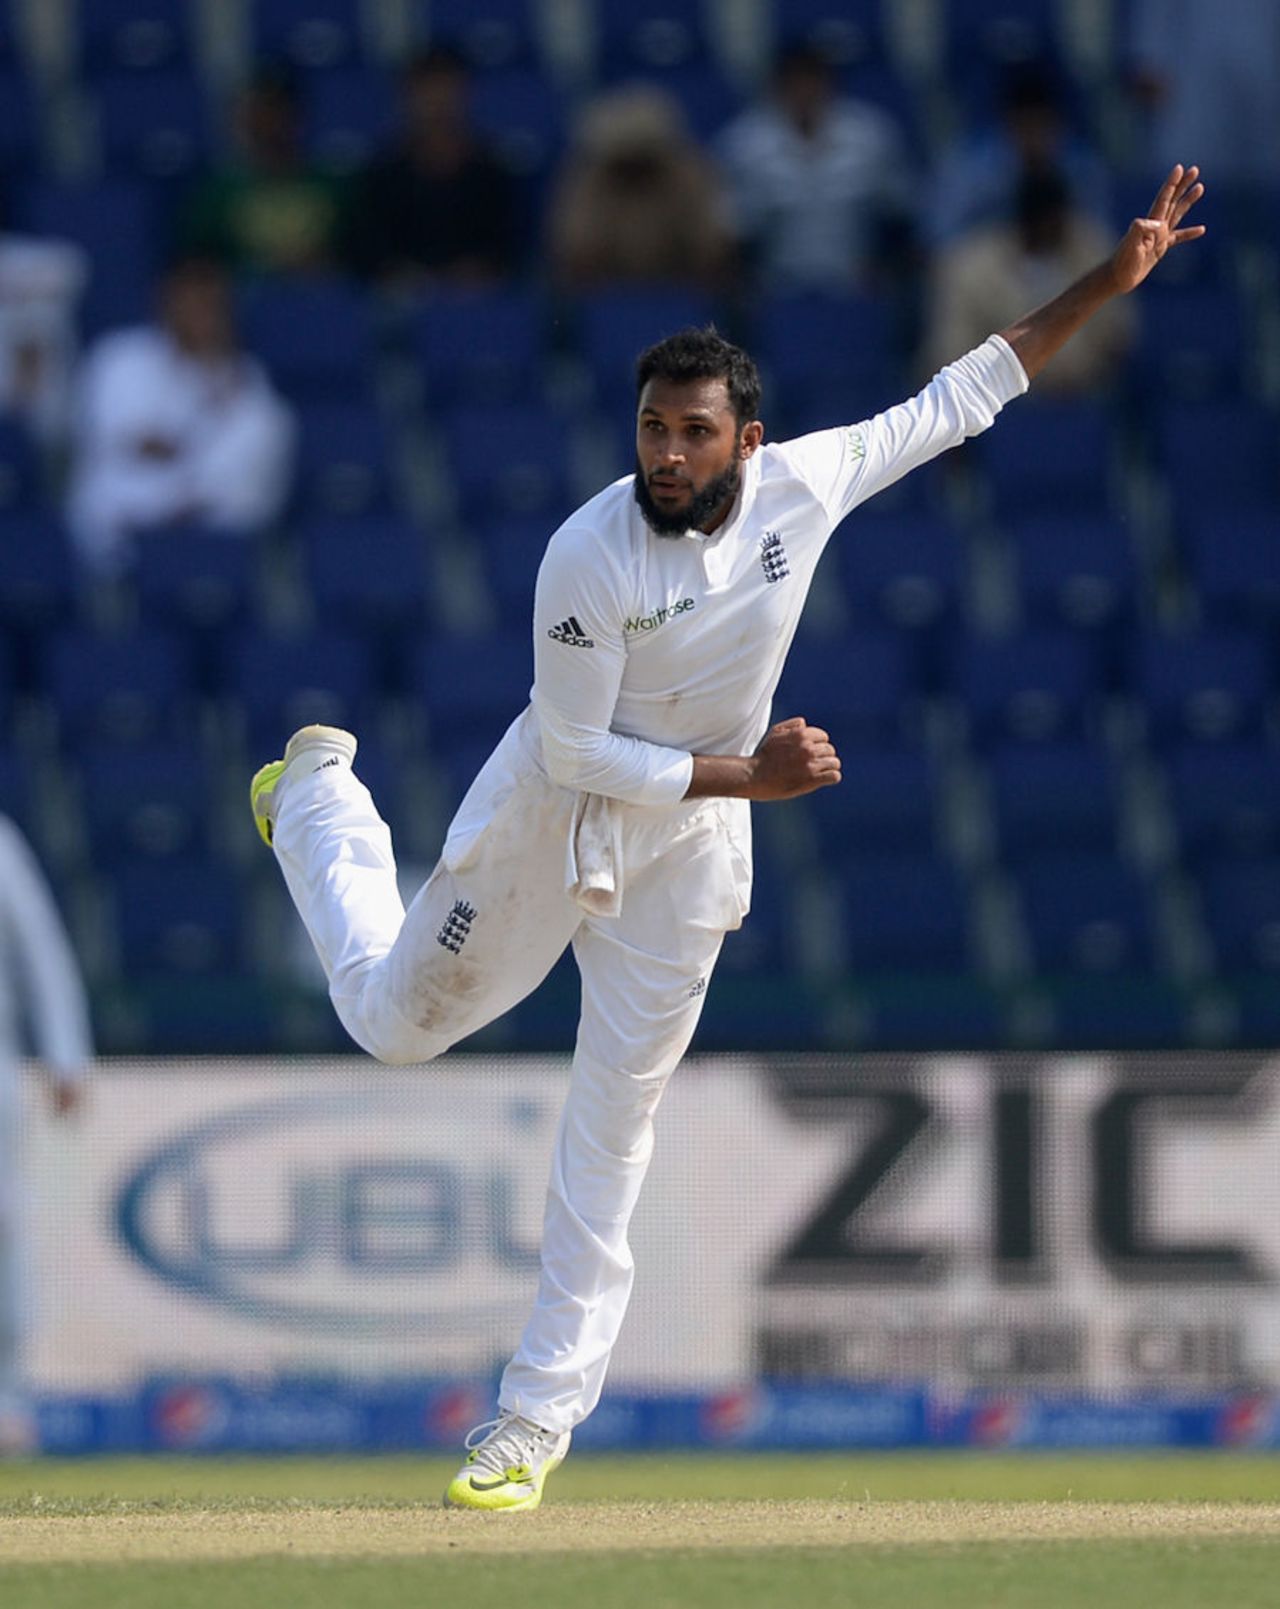 Adil Rashid became the first England legspinner to take five wickets since 1959, Pakistan v England, 1st Test, Abu Dhabi, 5th day, October 17, 2015